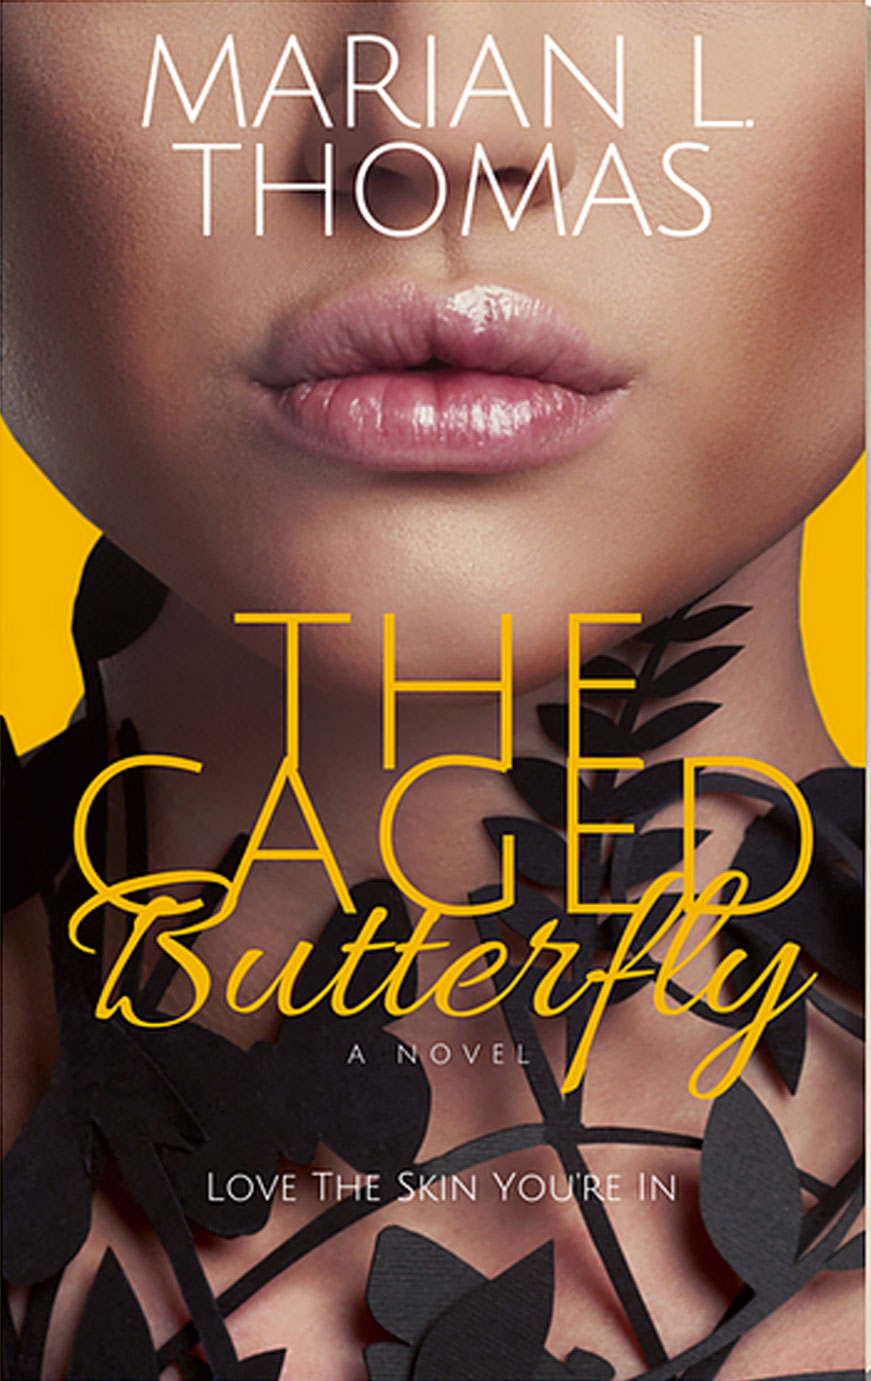 The Caged Butterfly by Marian L. Thomas